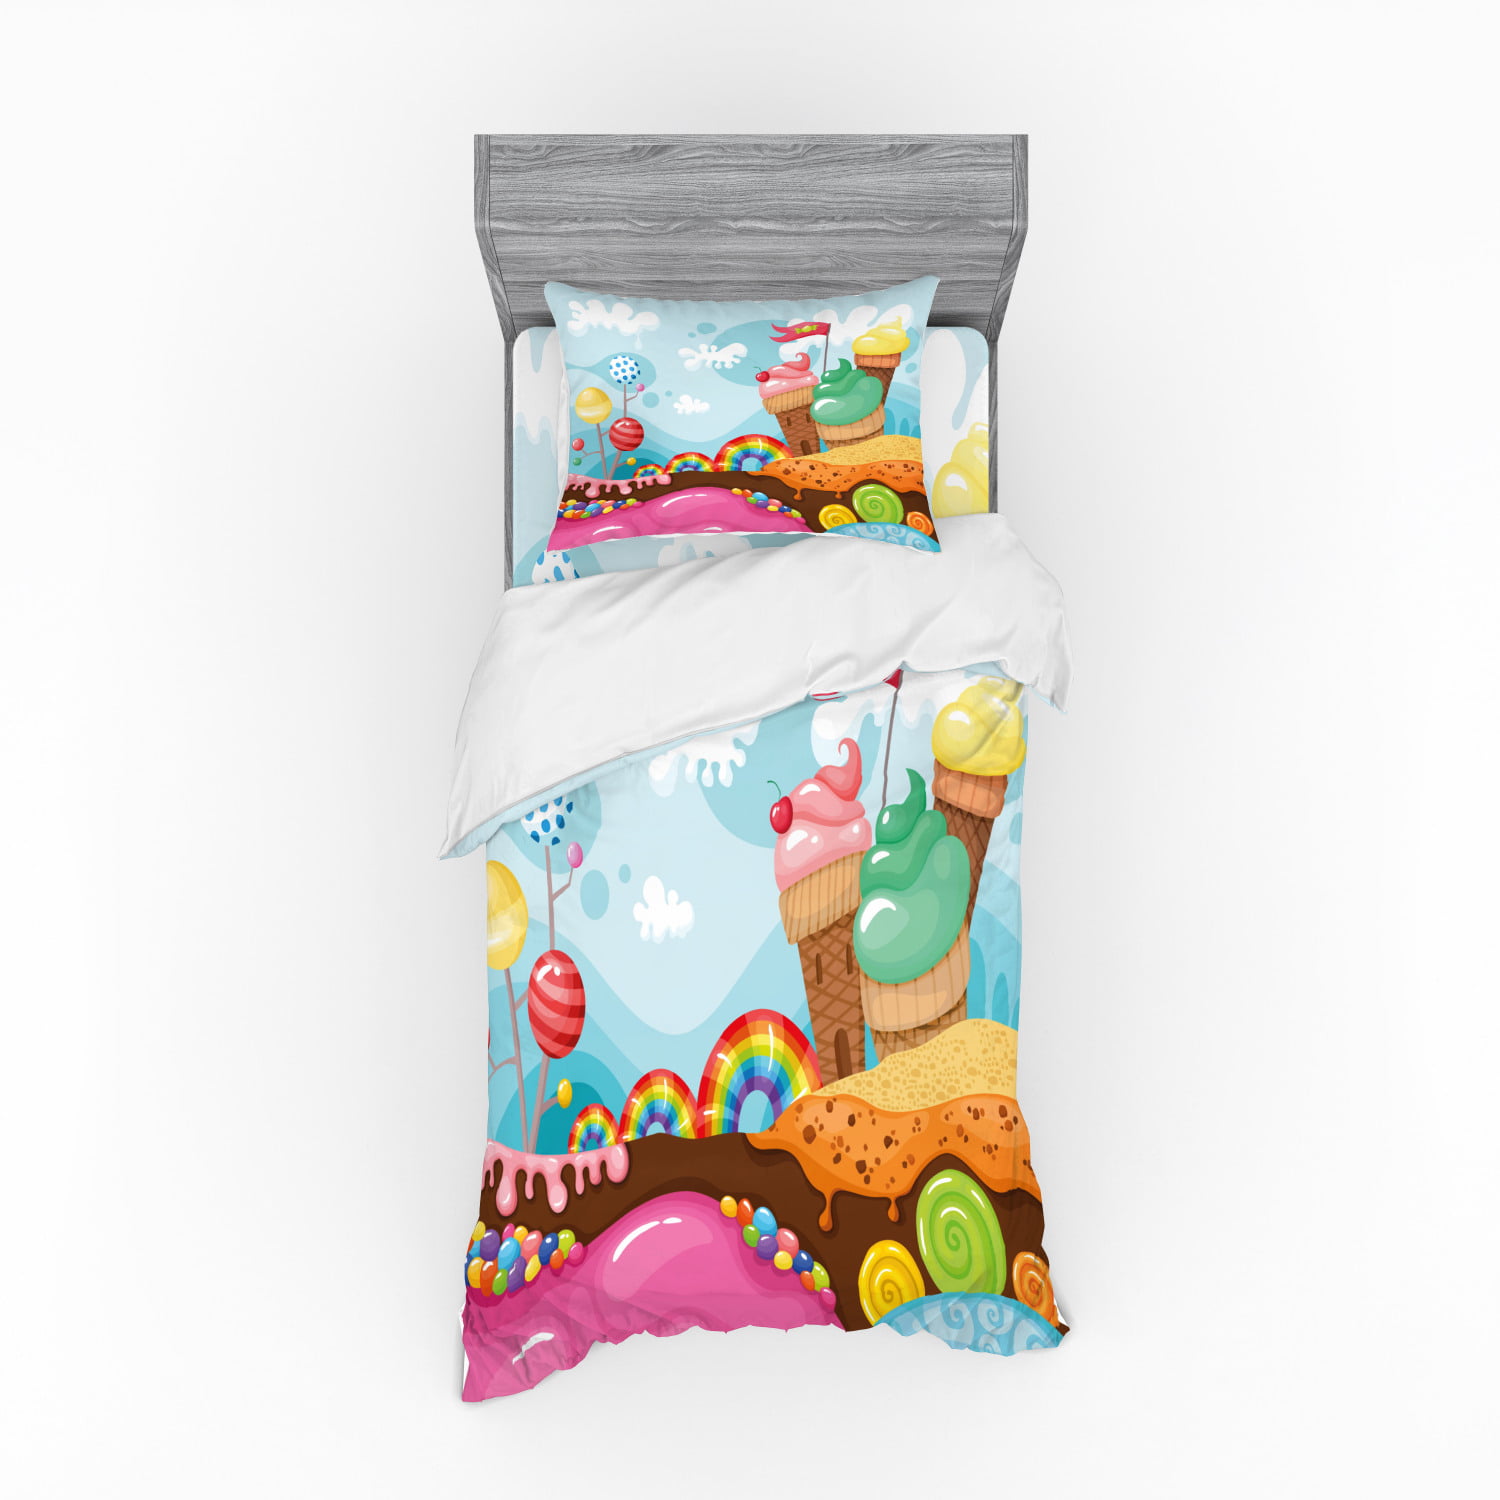 Dessert Land with Rainbow Candies Lollipop Trees and Cupcake Mountains Style of Cartoon Art Pink Blue 30 X 20 Decorative Standard Queen Size Printed Pillowcase Ambesonne Ice Cream Pillow Sham 